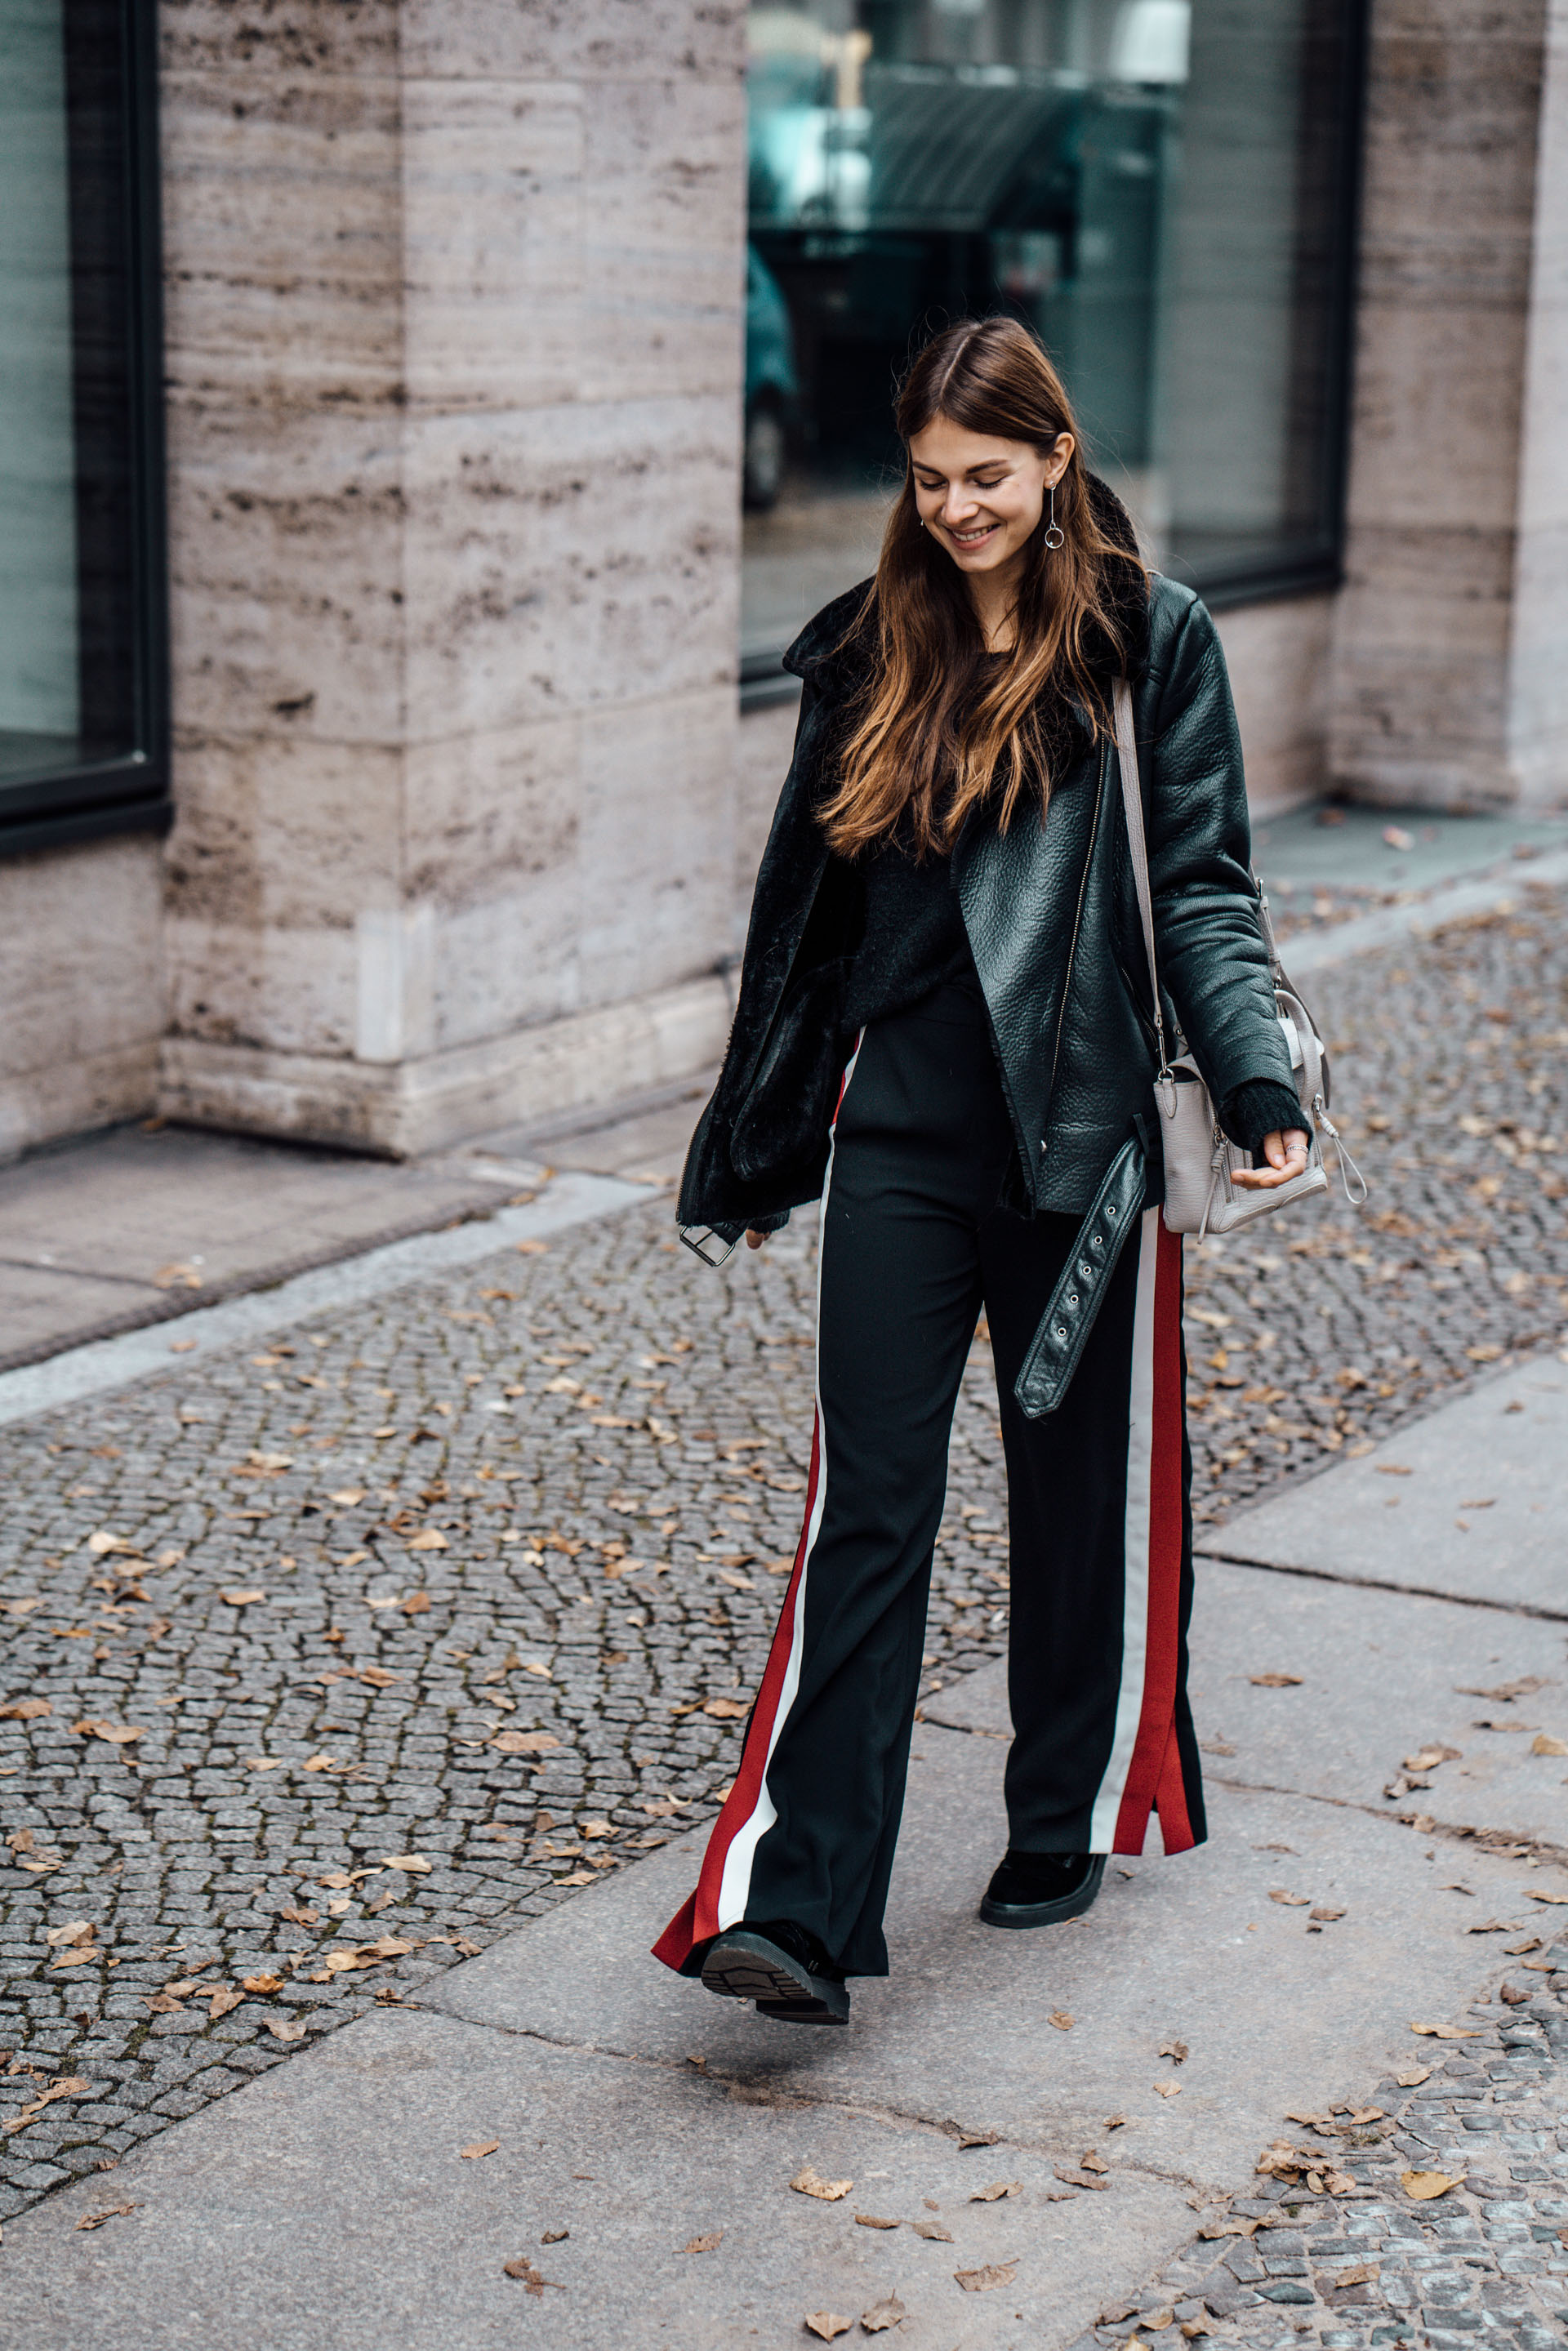 Winter Office Wear: Wide Leg Pants and Boots